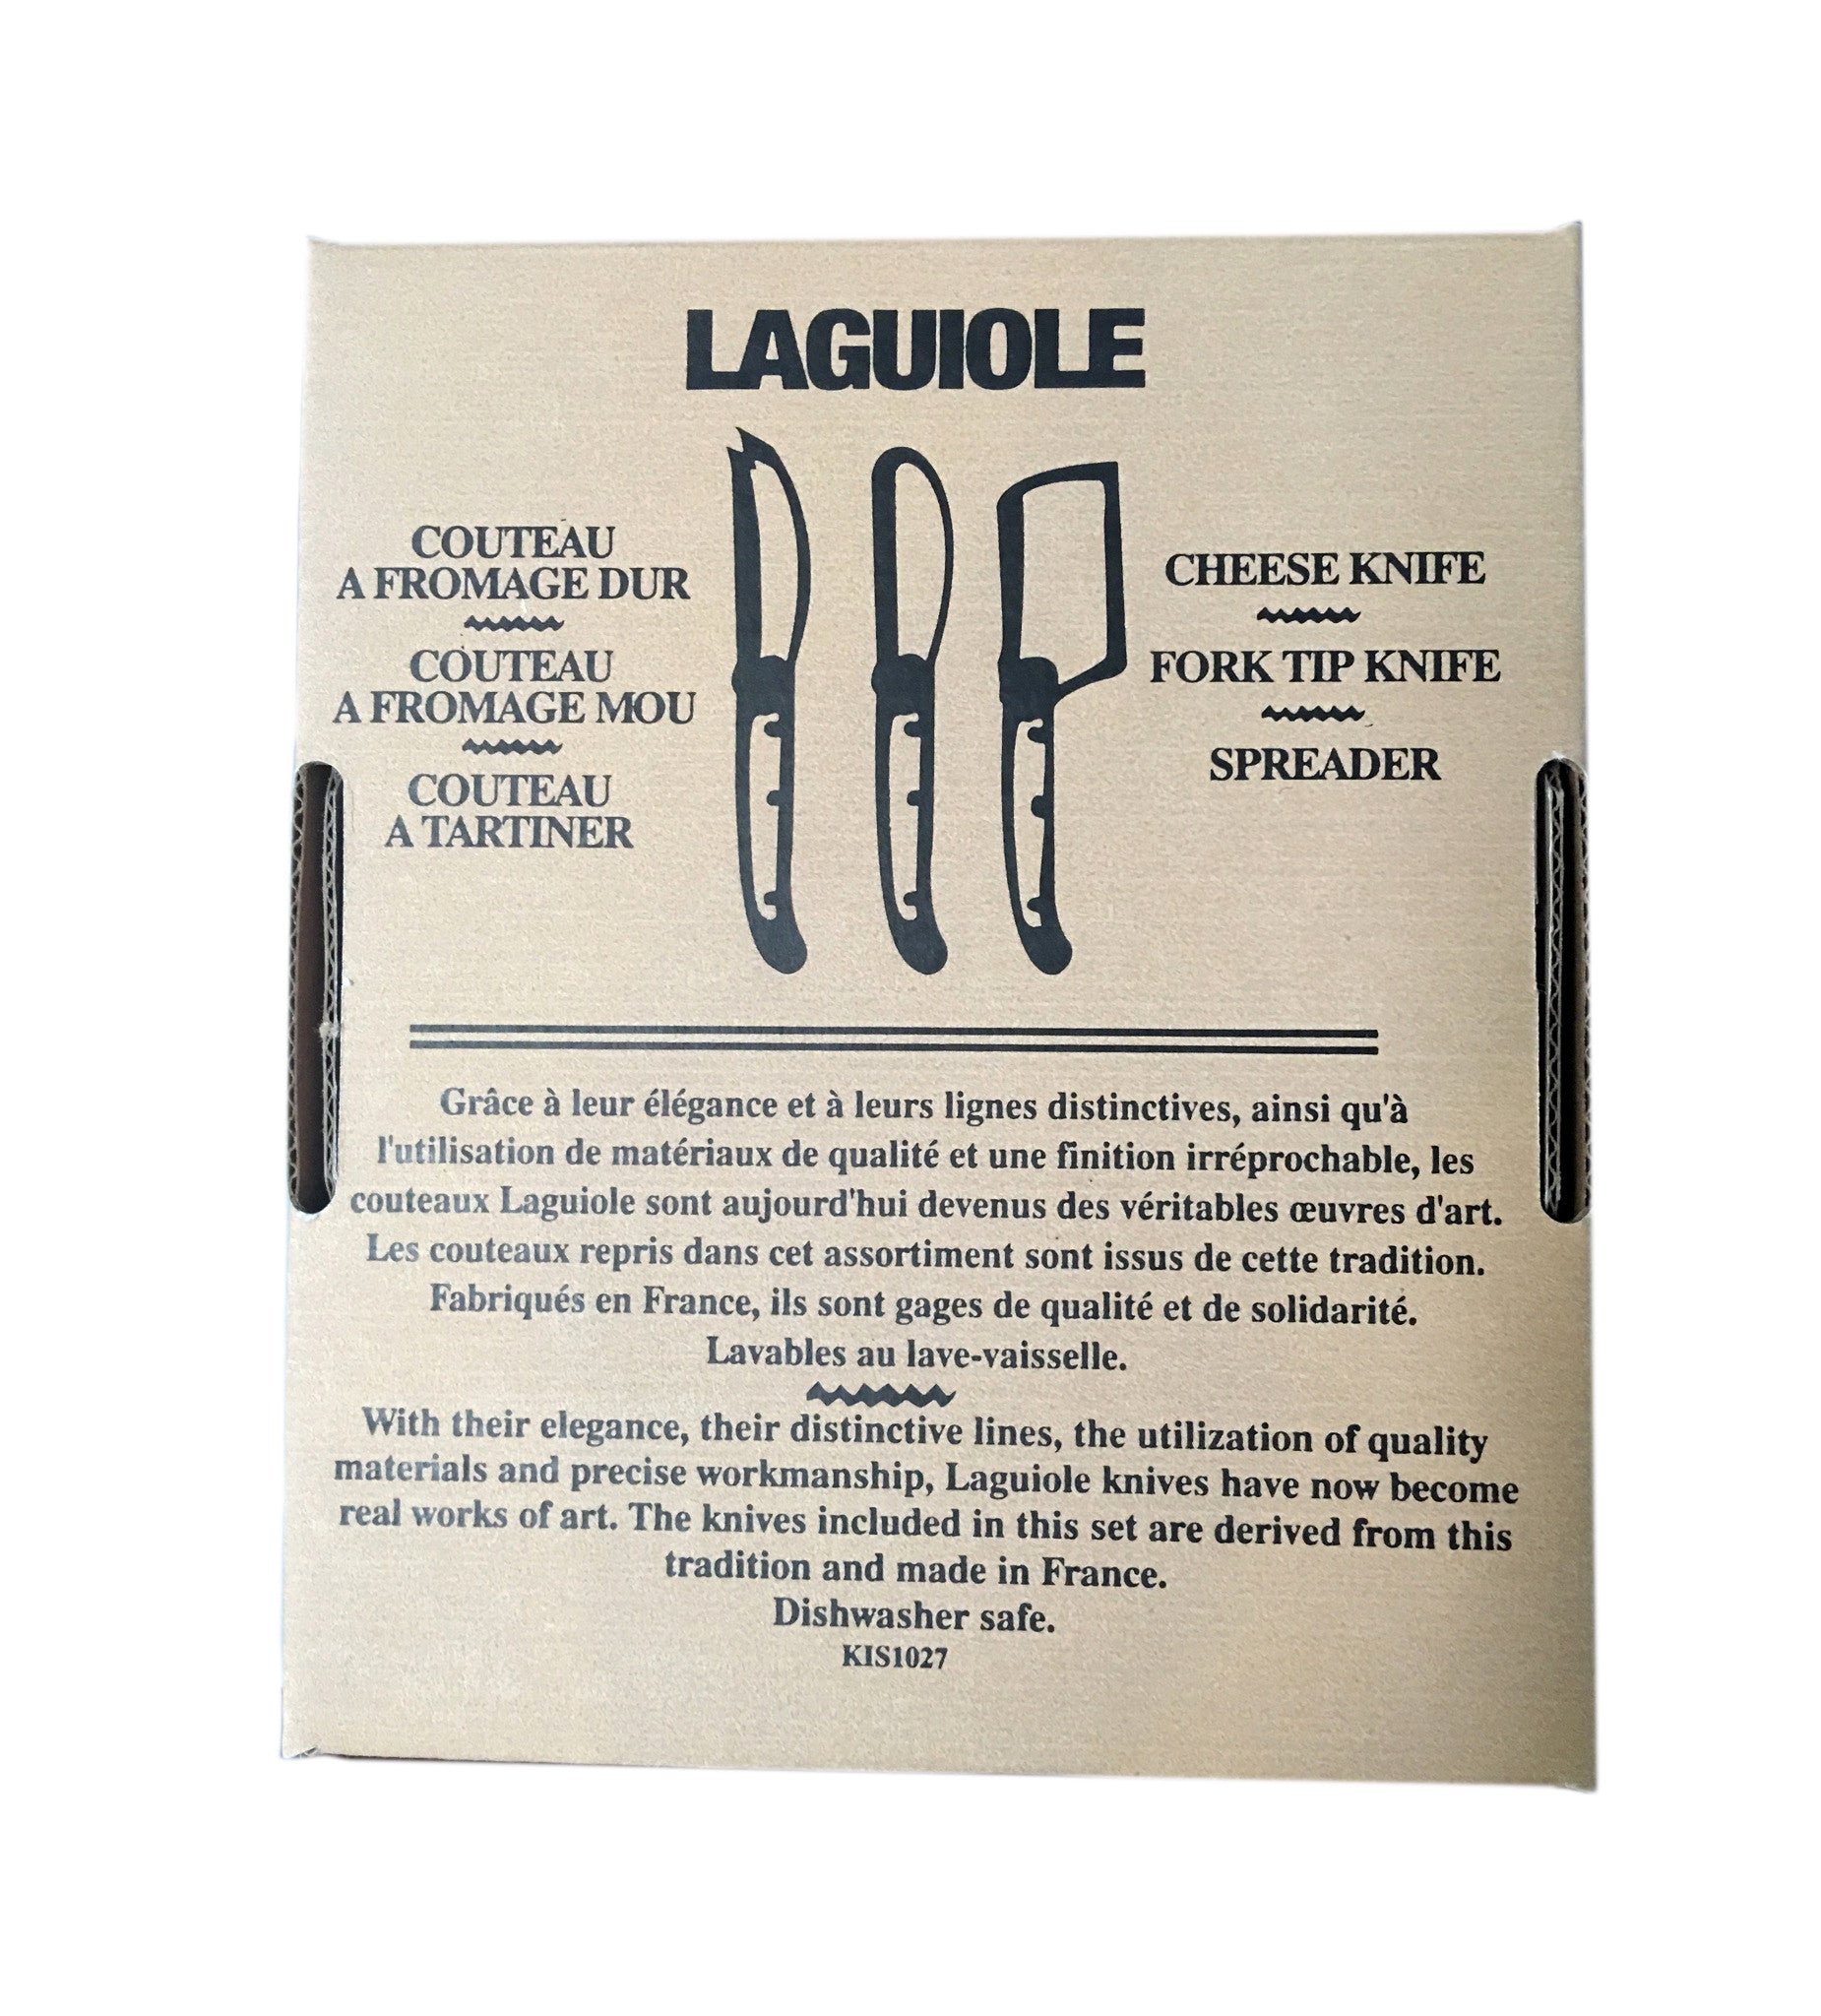 Laguiole Black Marble Mini Cheese Set in Brown Box (Cutter, Spreader, Fork Tipped Knife) Cutlery Set Laguiole Brand_Laguiole Gift Sets Kitchen_Dinnerware Kitchen_Kitchenware Knife Sets Laguiole Mini Cheese Sets Spring Collection mini_cheese_back_of_box